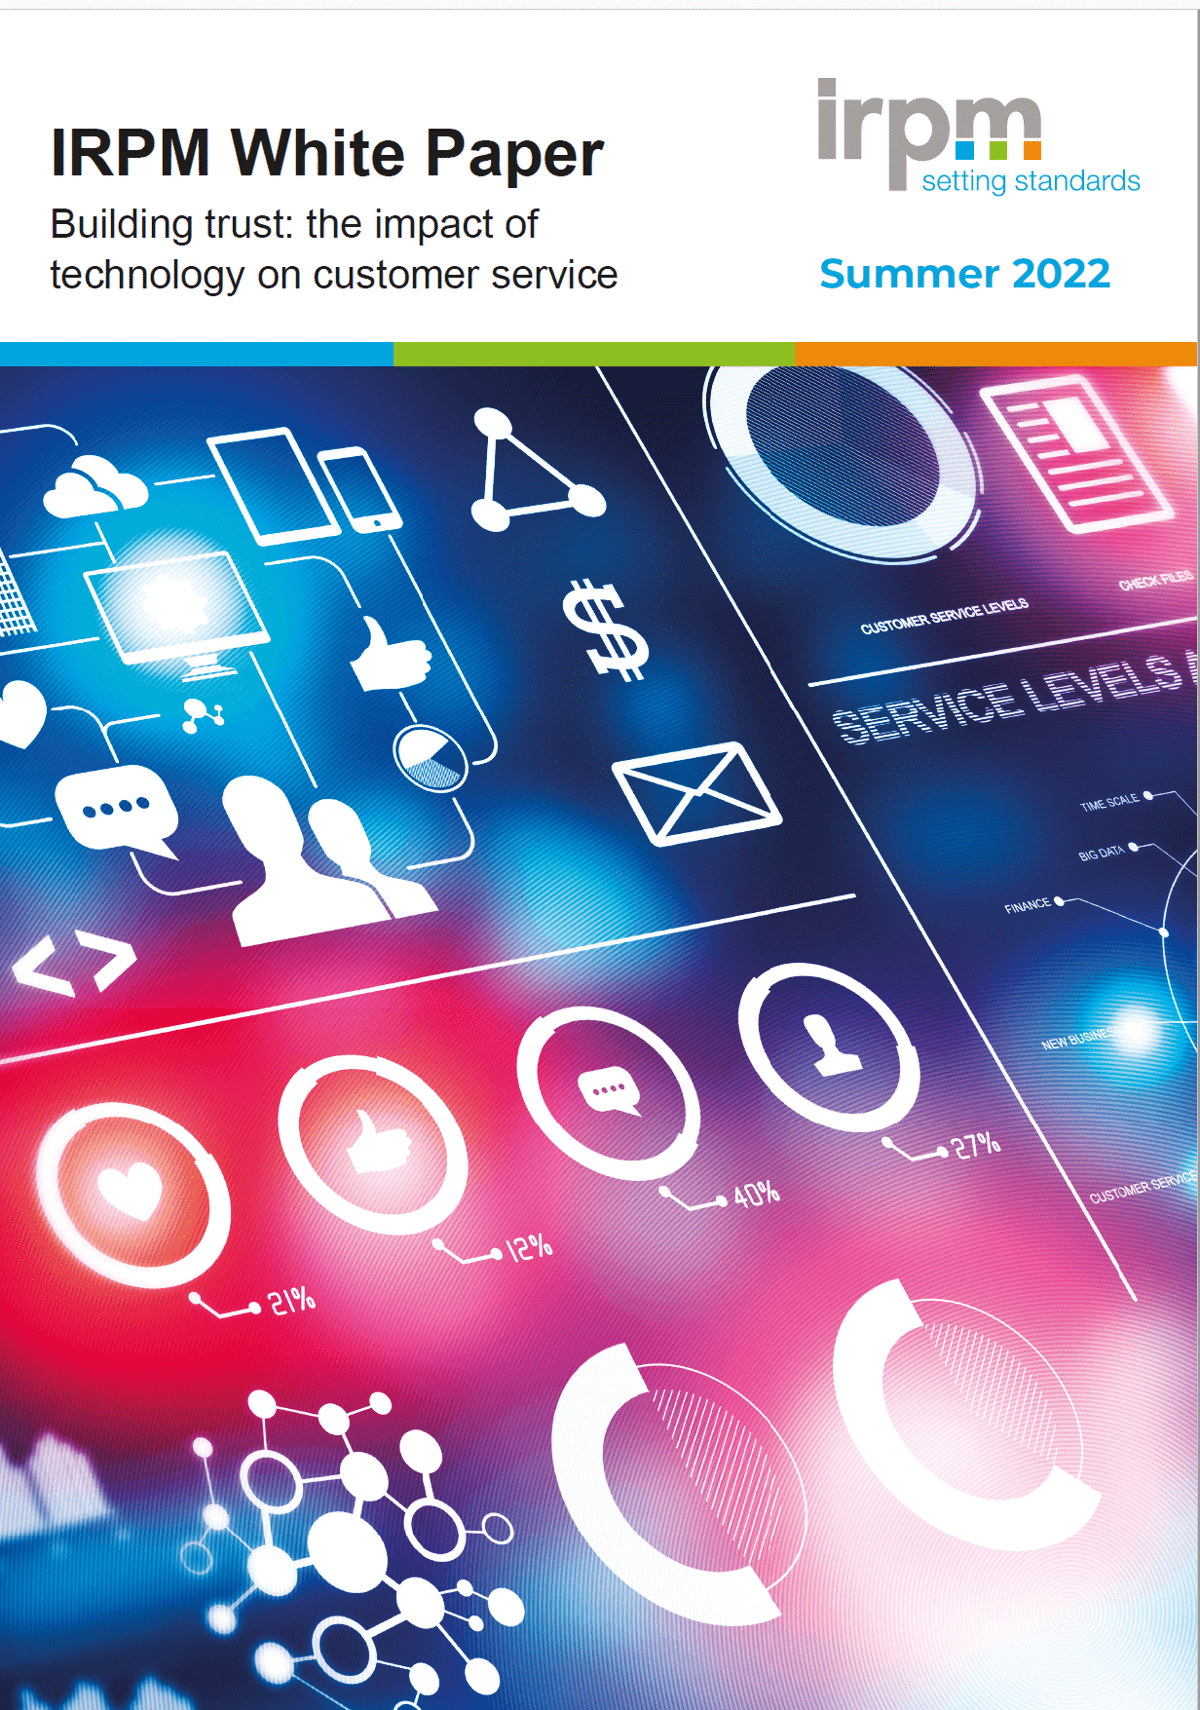 IRPM WHITE PAPER - Building Trust: the impact of tech on customer service -Image